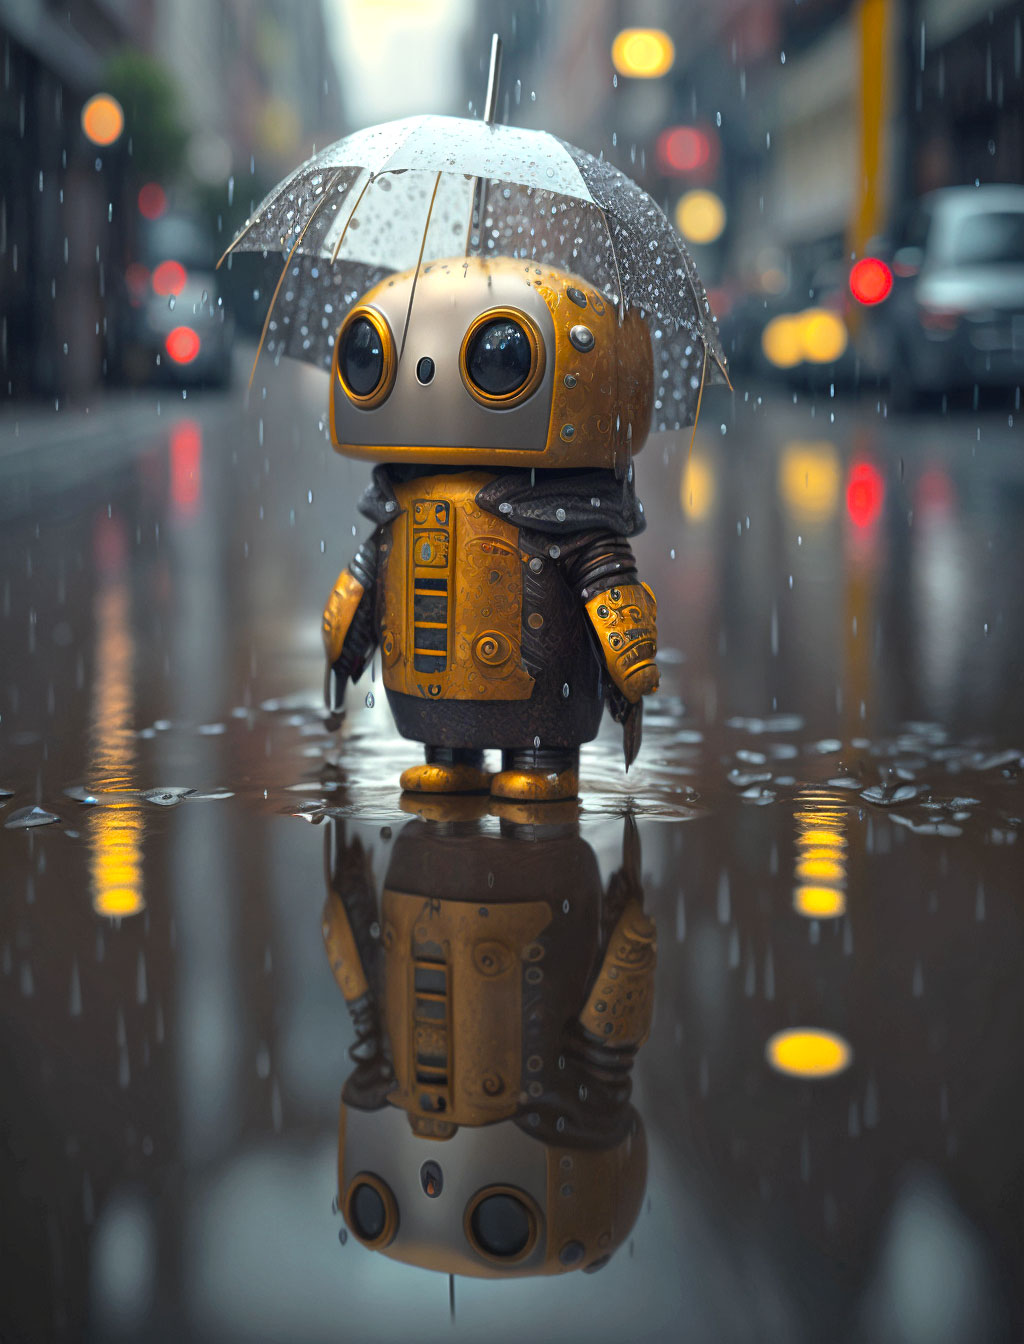 litte robot lost in the big rainy city